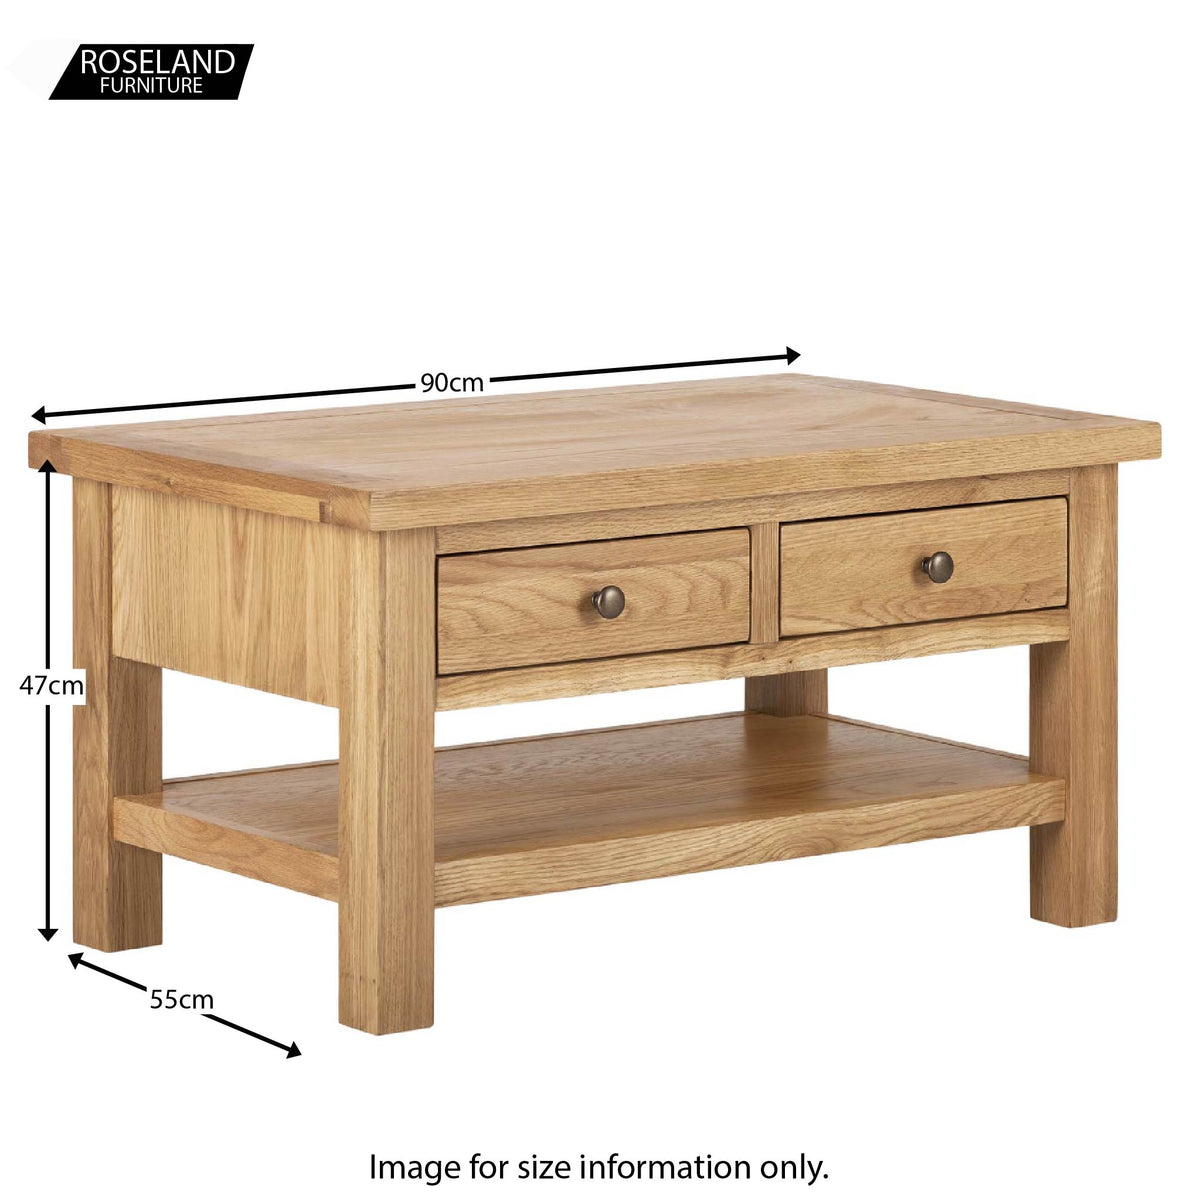 Dimensions - Charlestown Oak Coffee Table with 2 Drawers